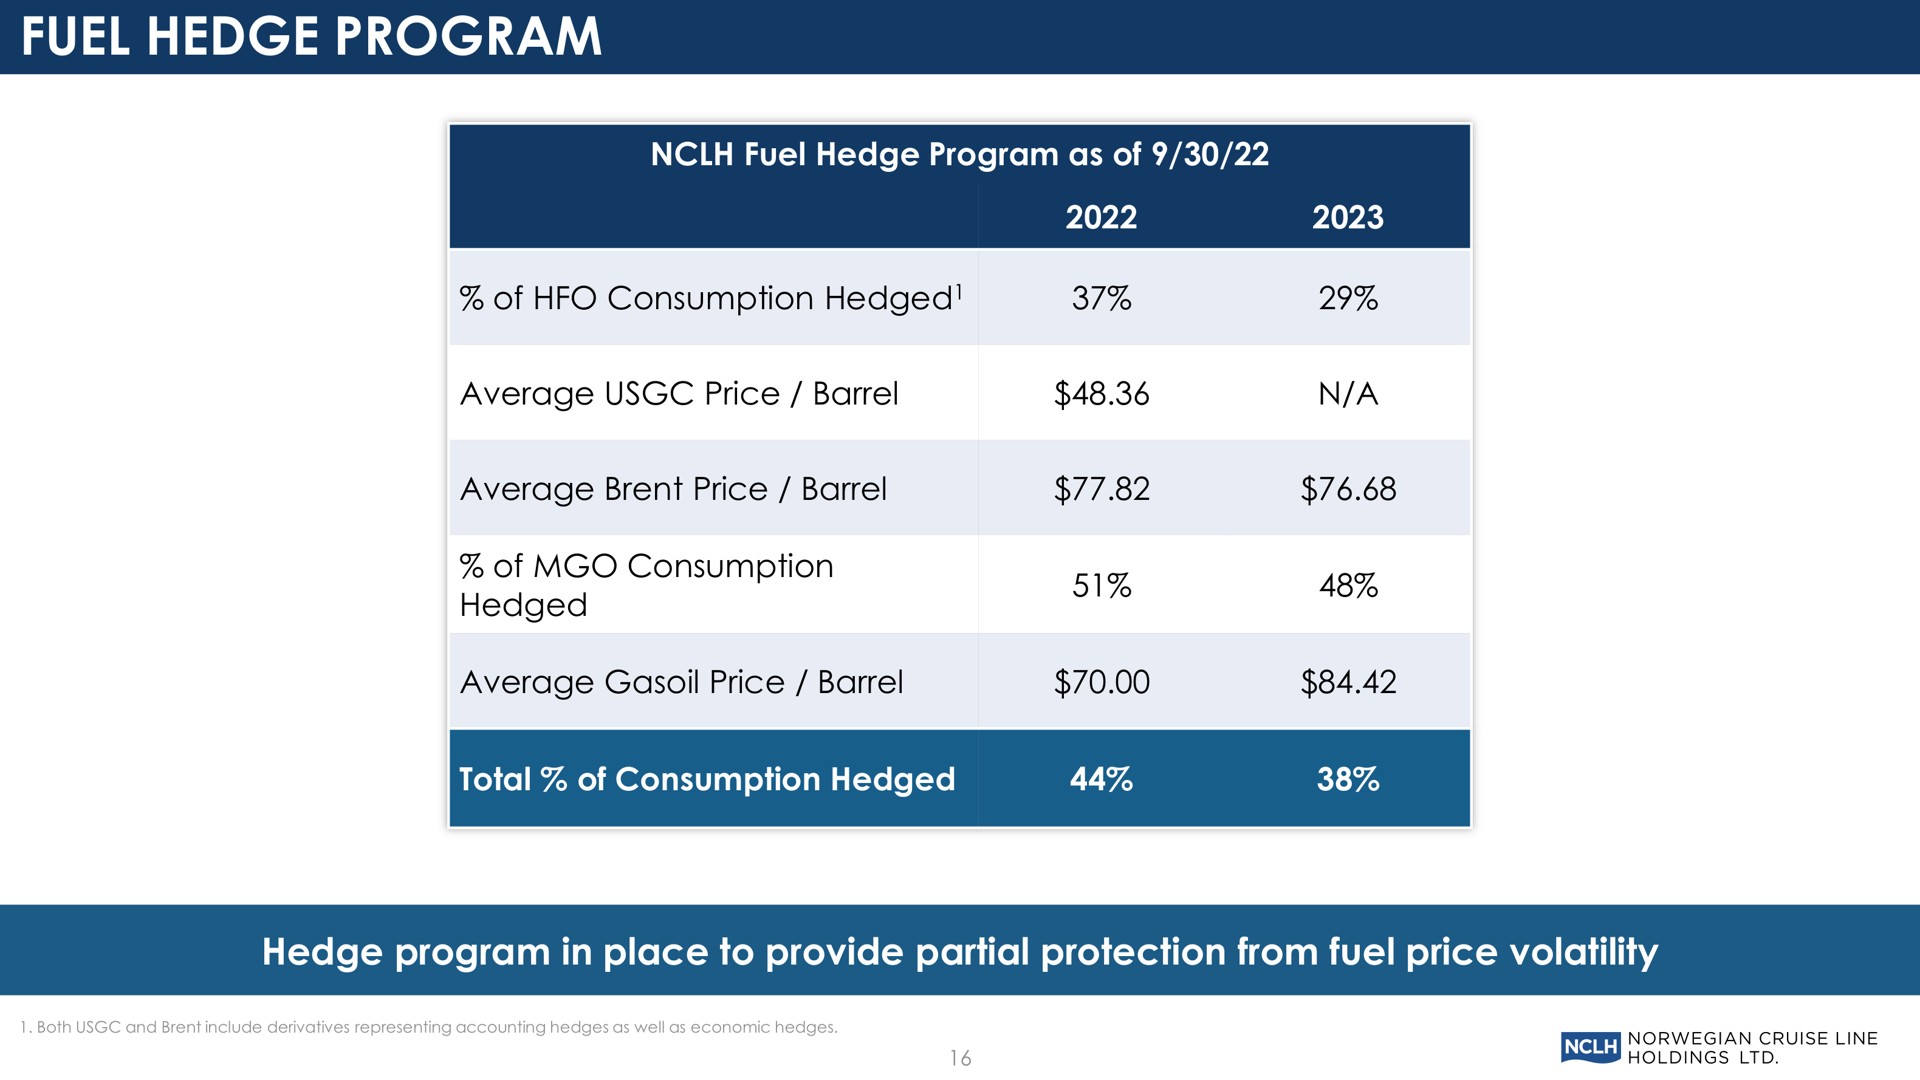 fuel hedge program hedge program in place to provide partial protection from fuel price volatility | Norwegian Cruise Line